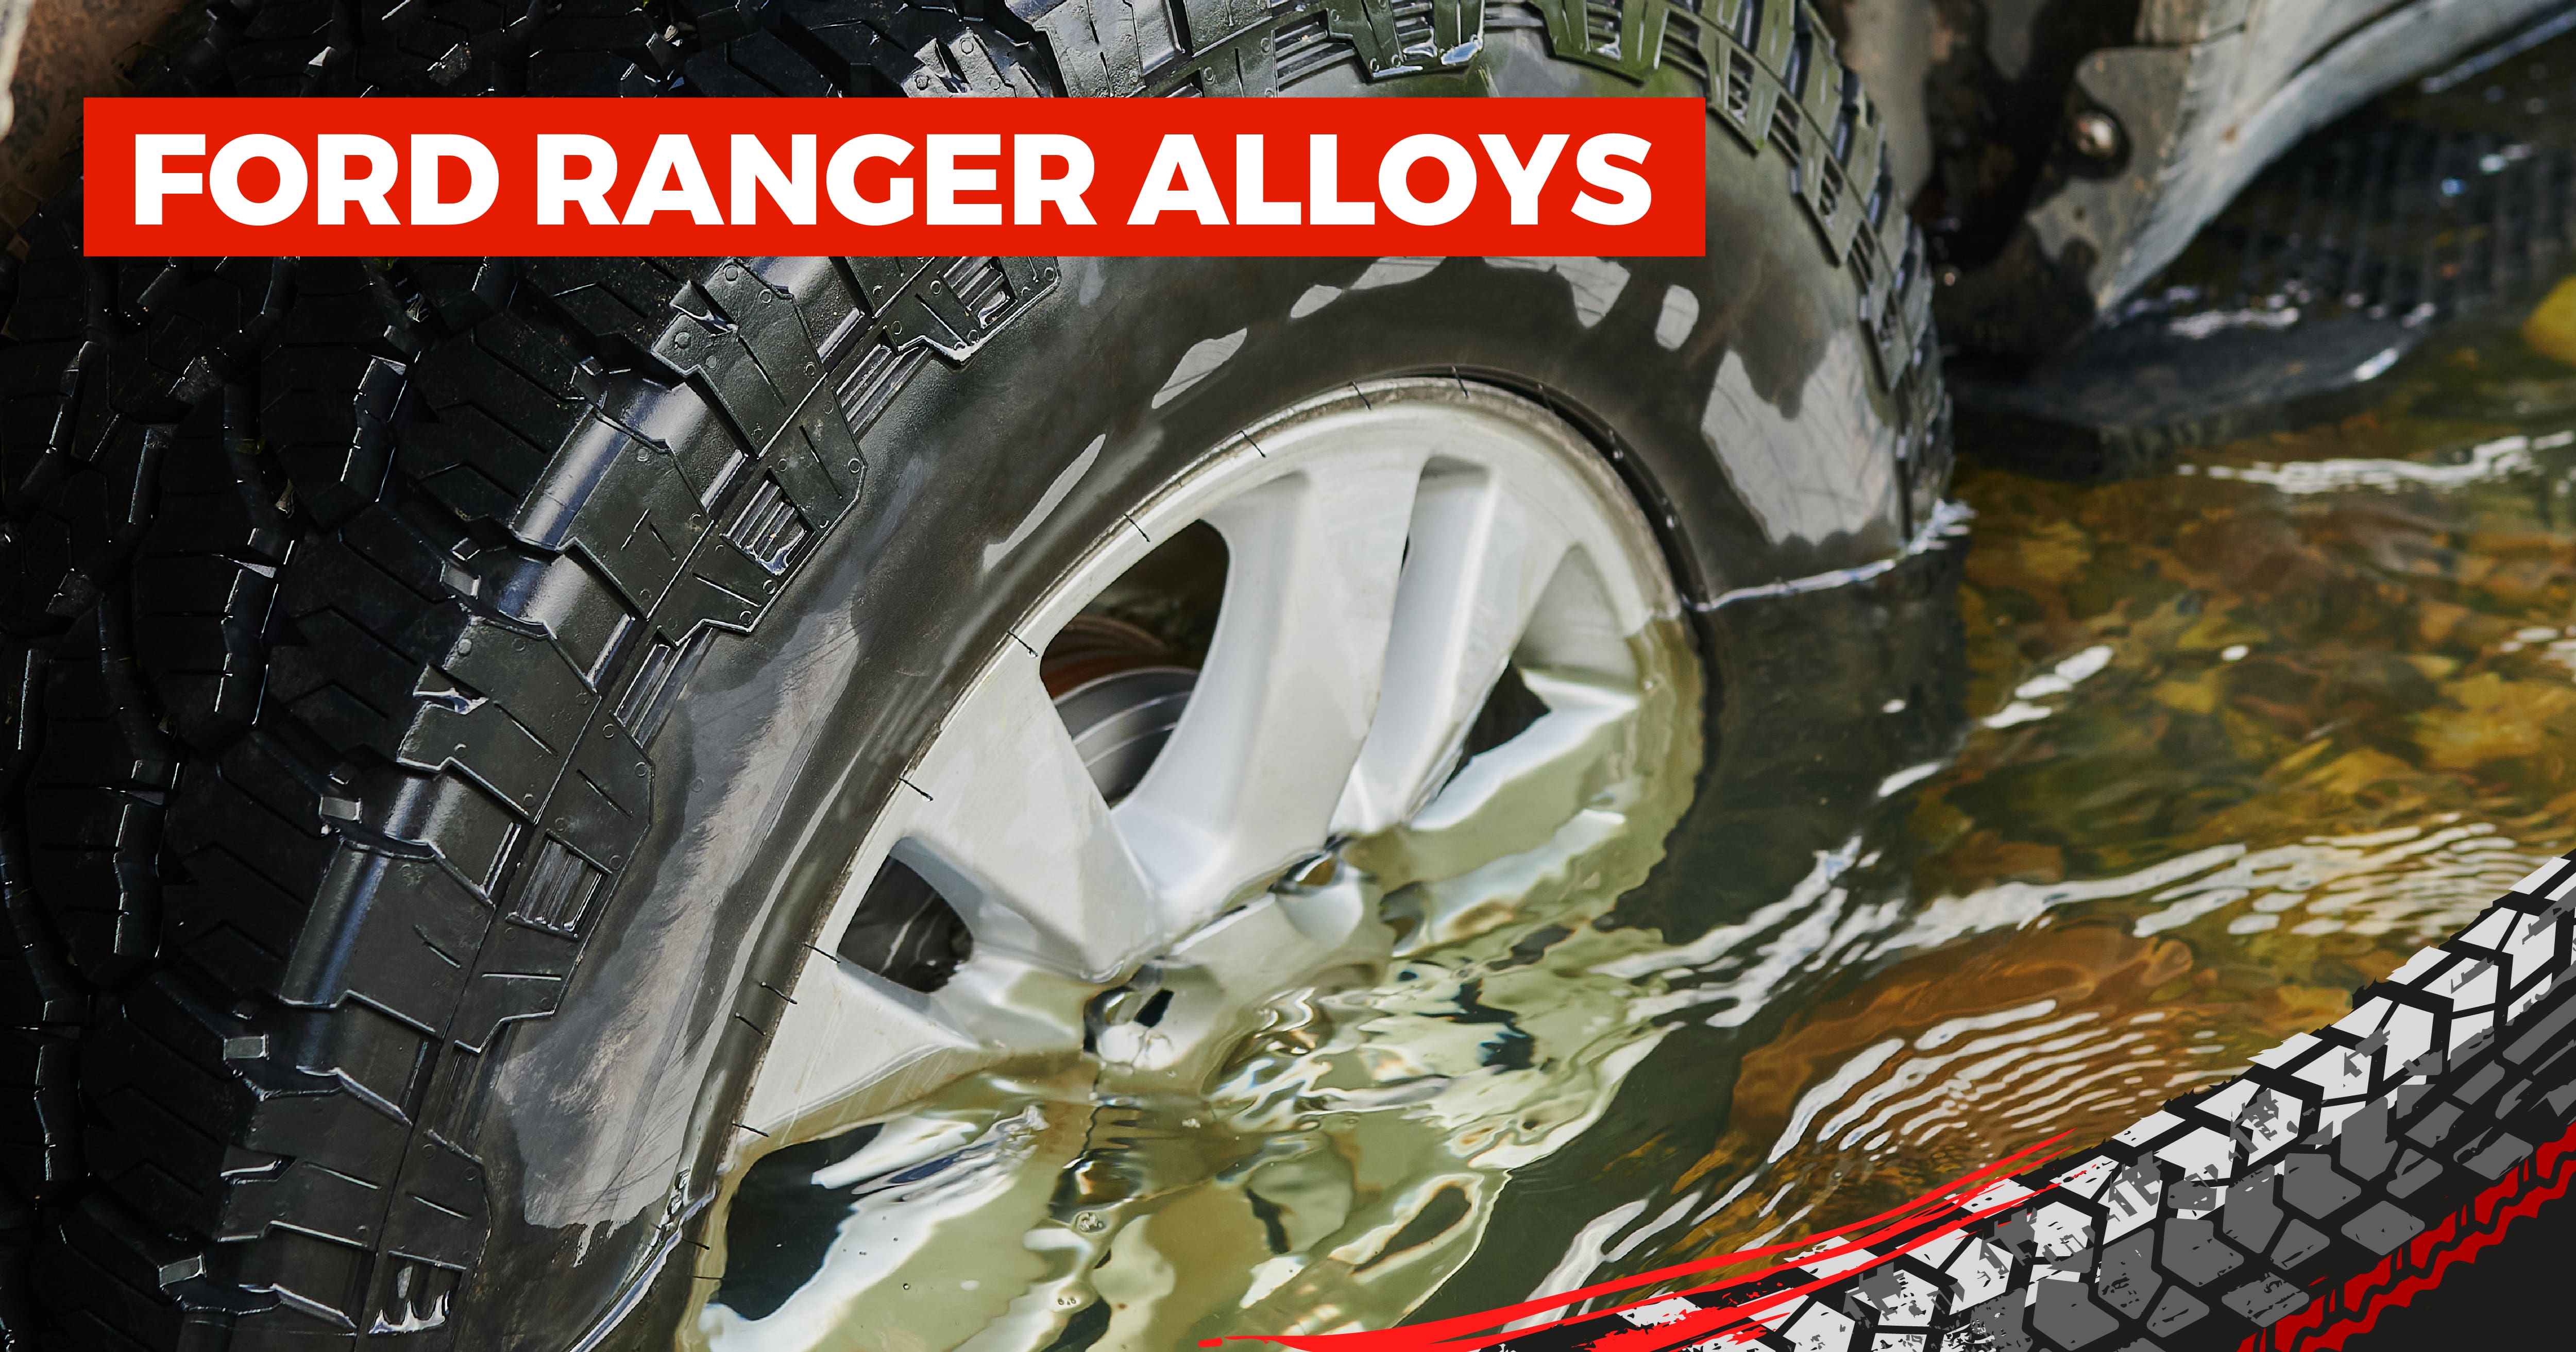 Ford Ranger Alloys: Everything You Need To Know